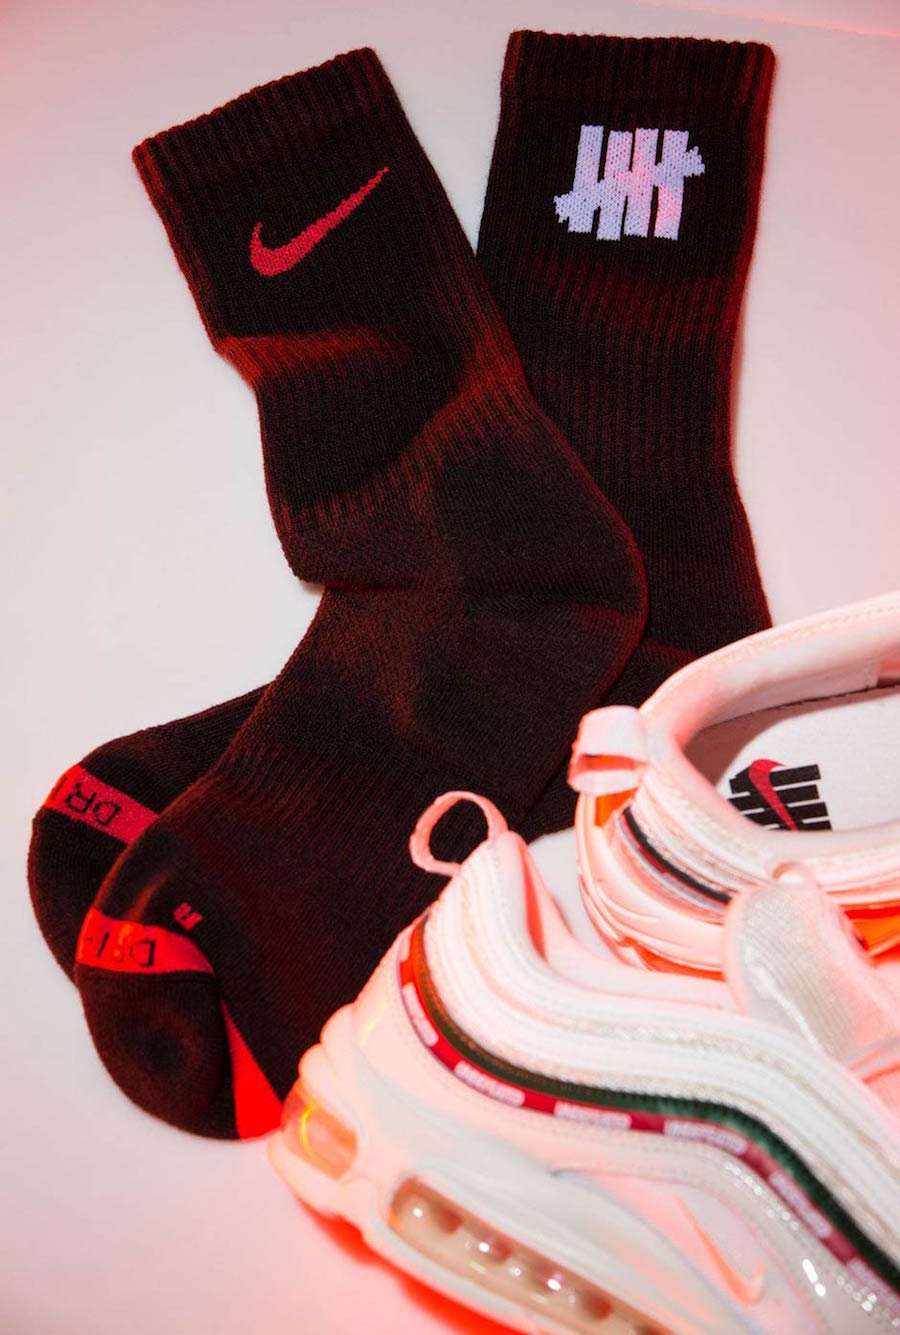 Undefeated Nike Air Max 97 OG Apparel Collection